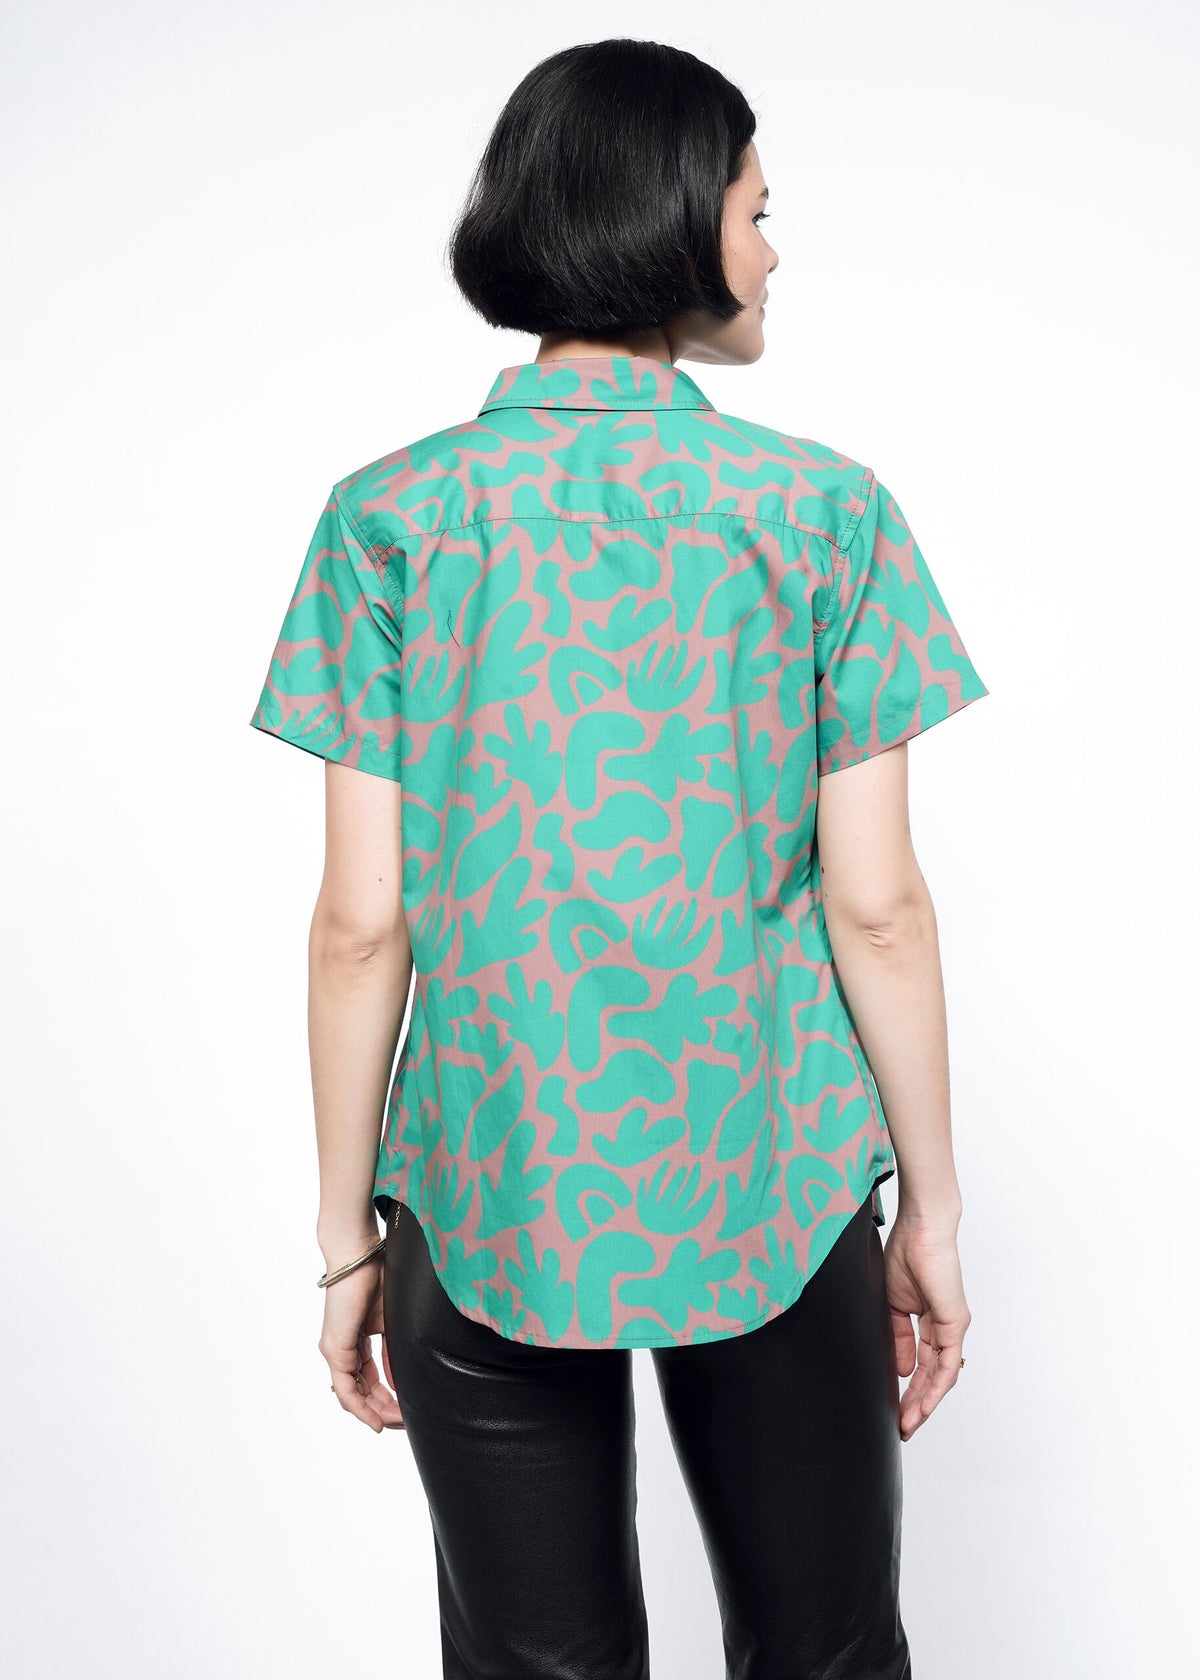 Back image of model wearing the Essential Button Up in Abstract Emerald in size XS, with black faux leather leggings